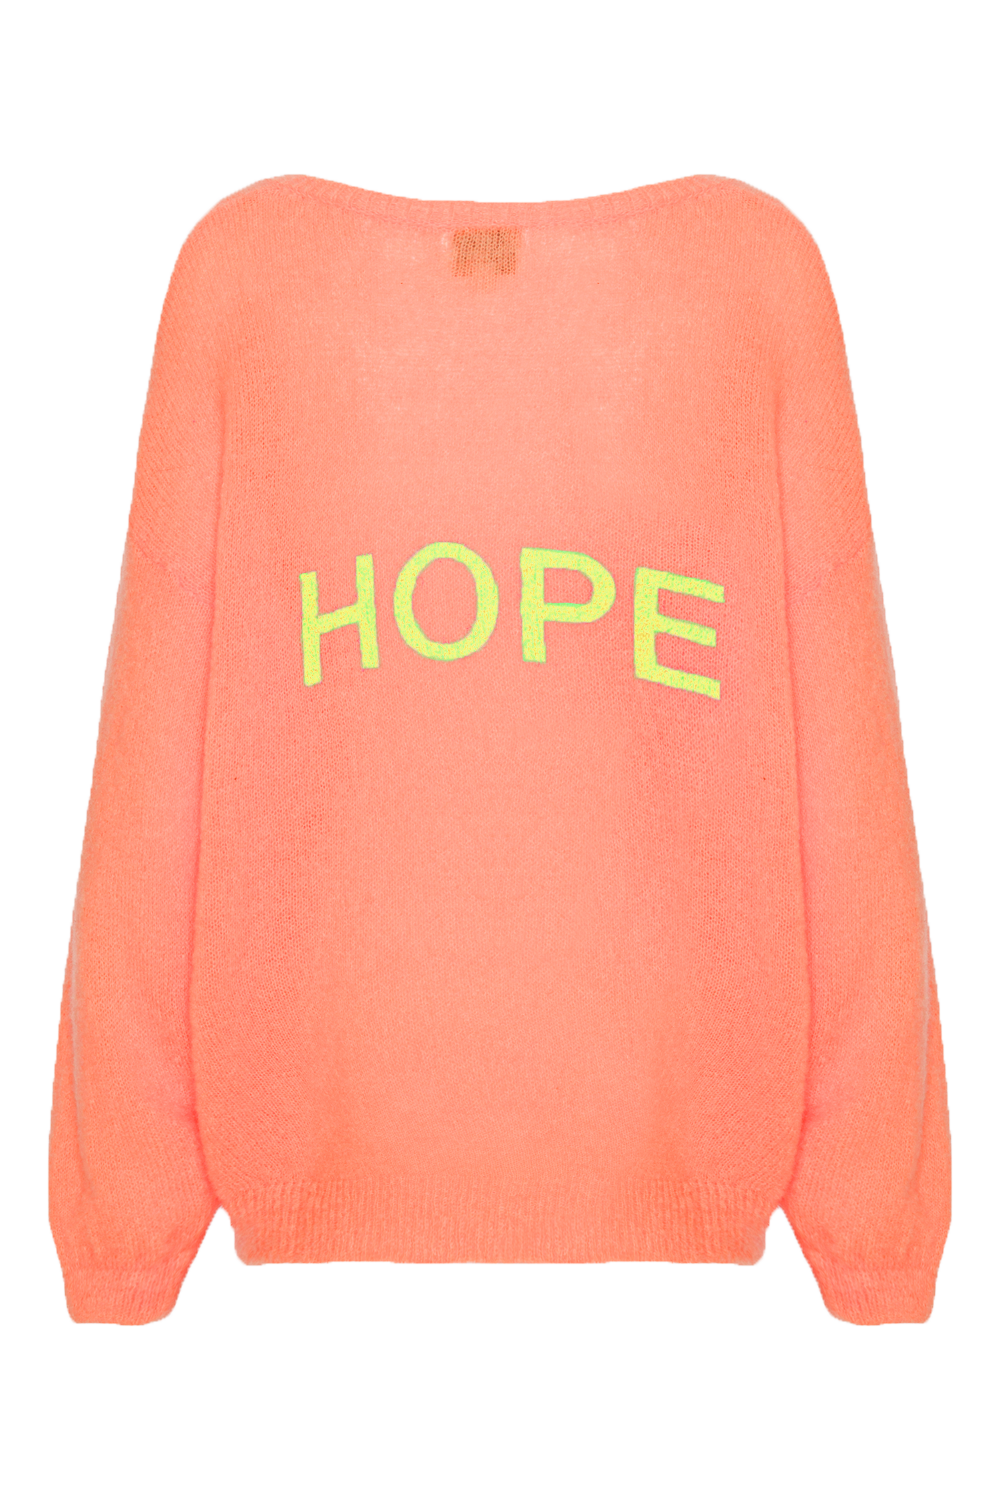 Silja Back Letters Salmon W/ Lime Green Letters (HOPE)